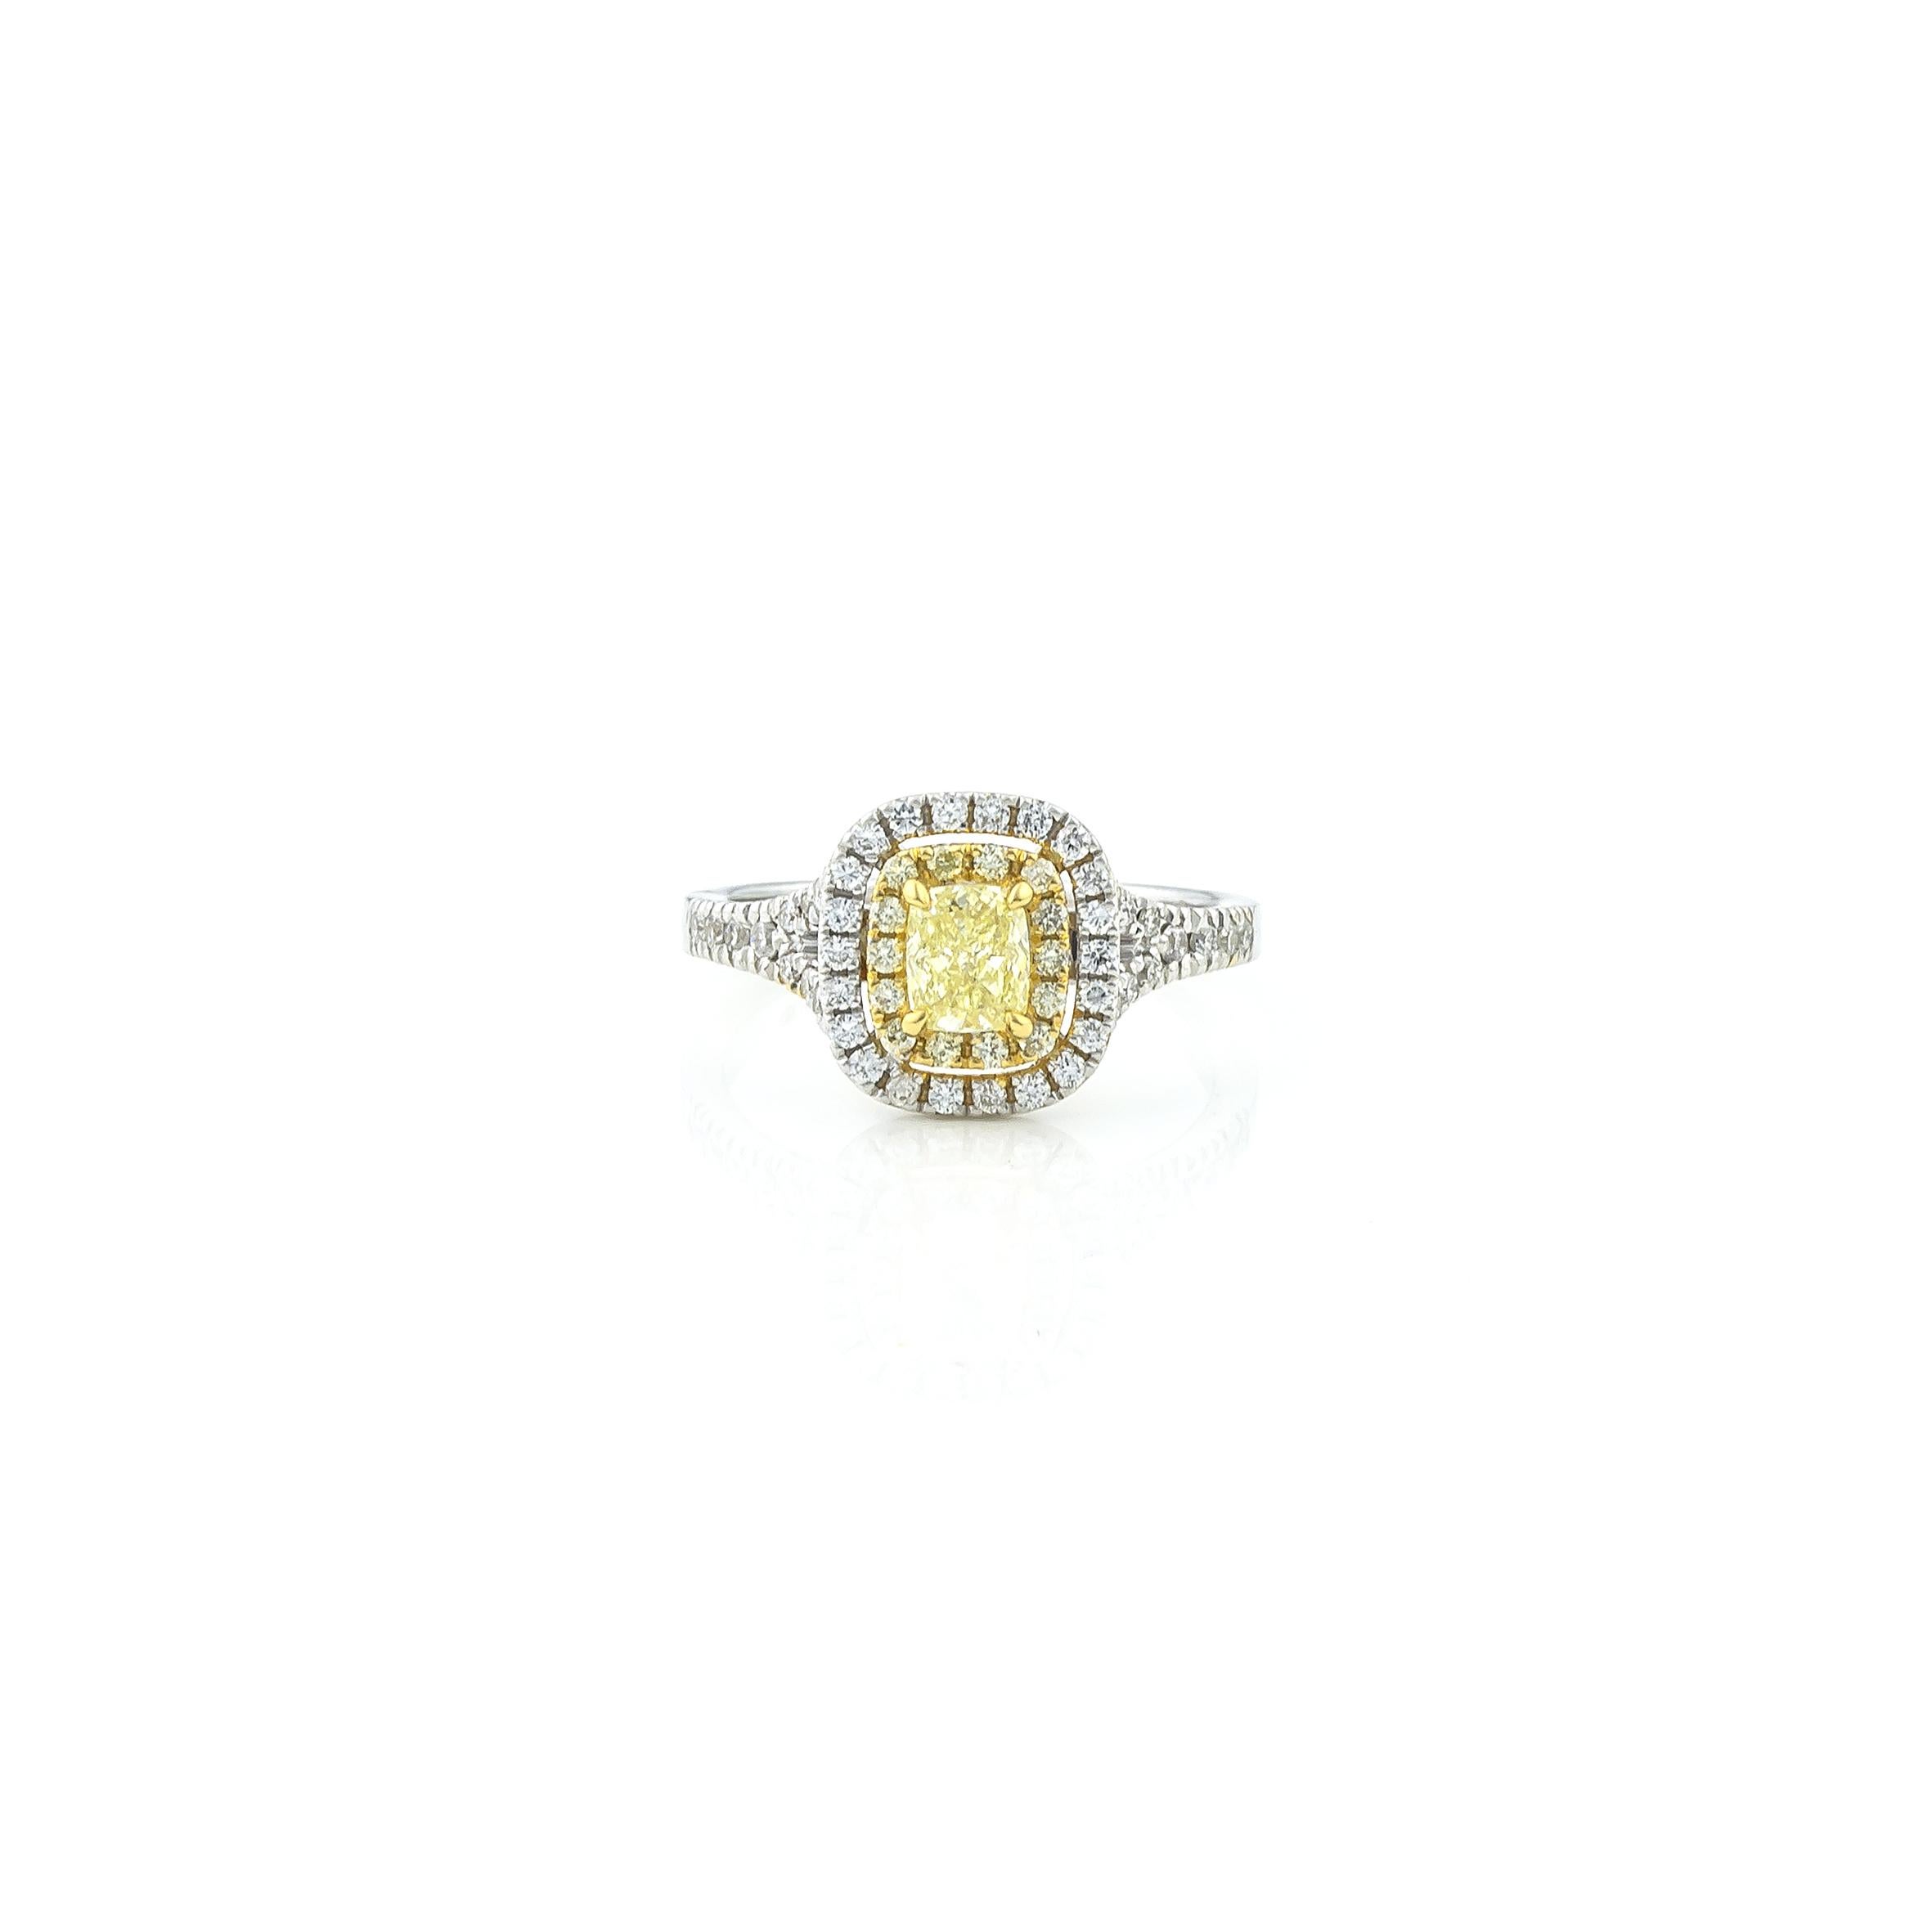 Double Halo Cushion Yellow Diamond Ring 0.66 carat, in 18KT White Gold, surrounded by 0.54 carat white brilliant cut diamonds Pave Set Sholders.
The two Haloes of Pave diamonds reflect the light while the central yellow diamond, set among with four